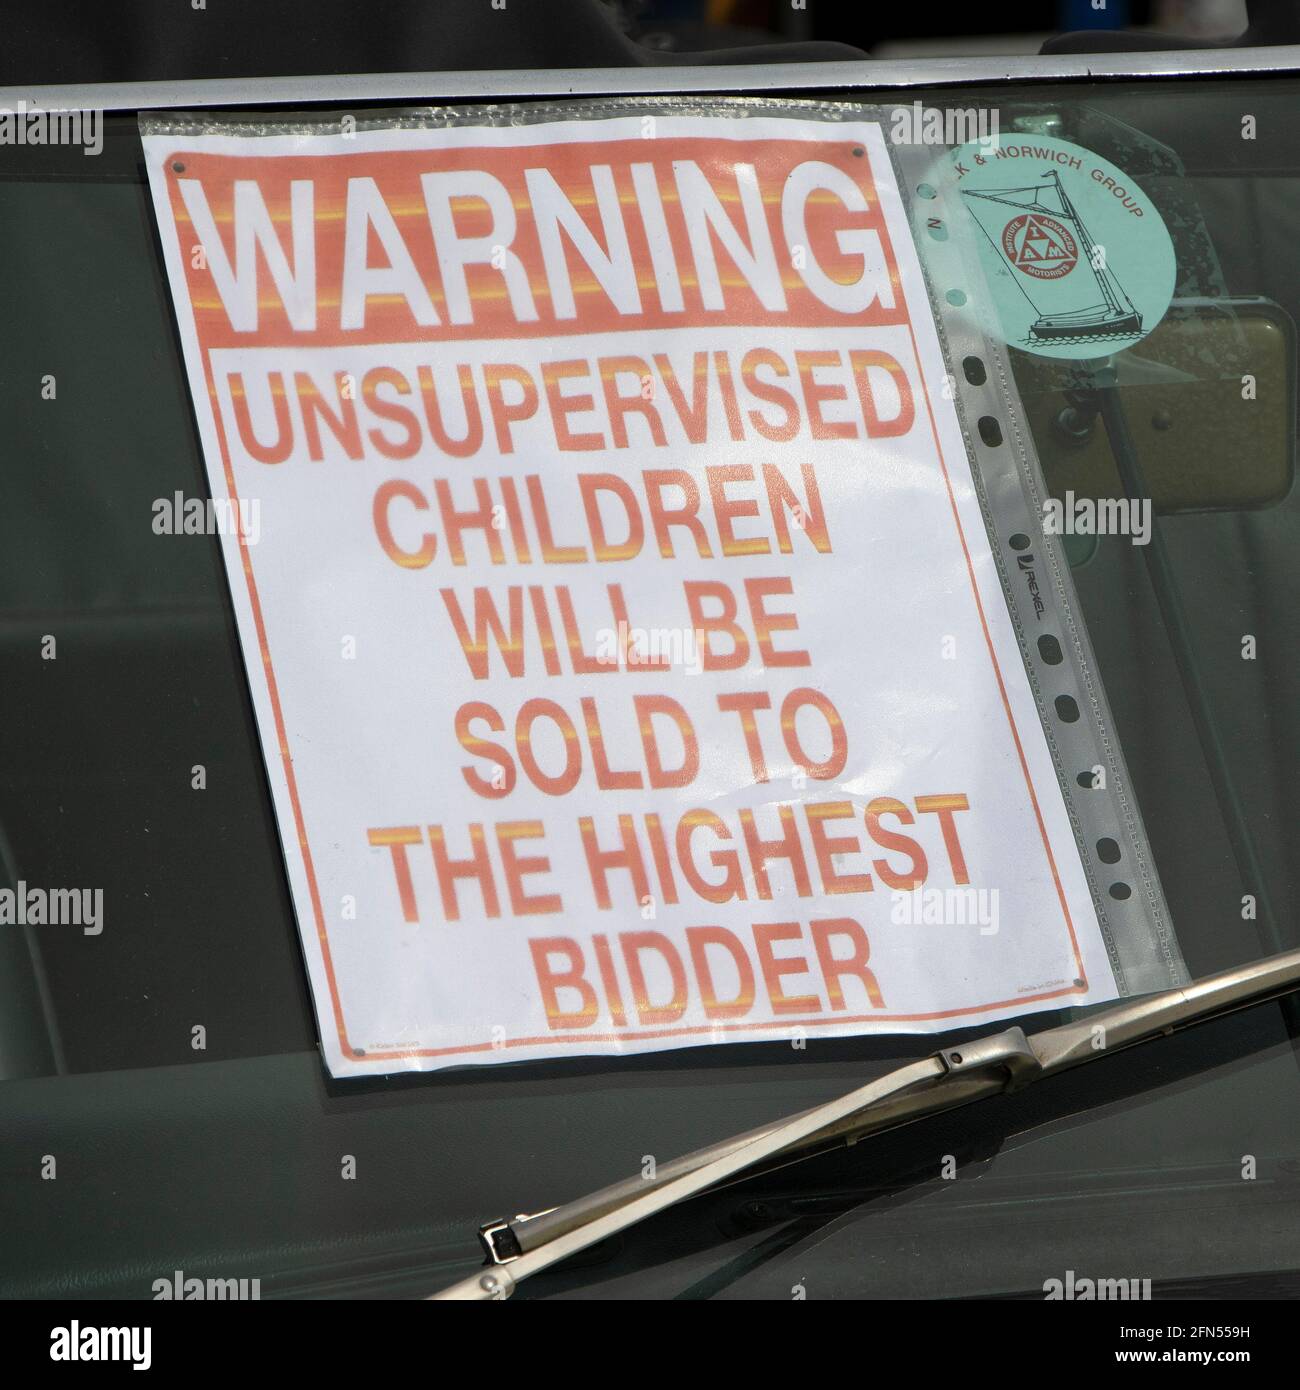 Amusing sign on the inside of a vehicle windscreen at a motor show in Norfolk, UK. Stock Photo